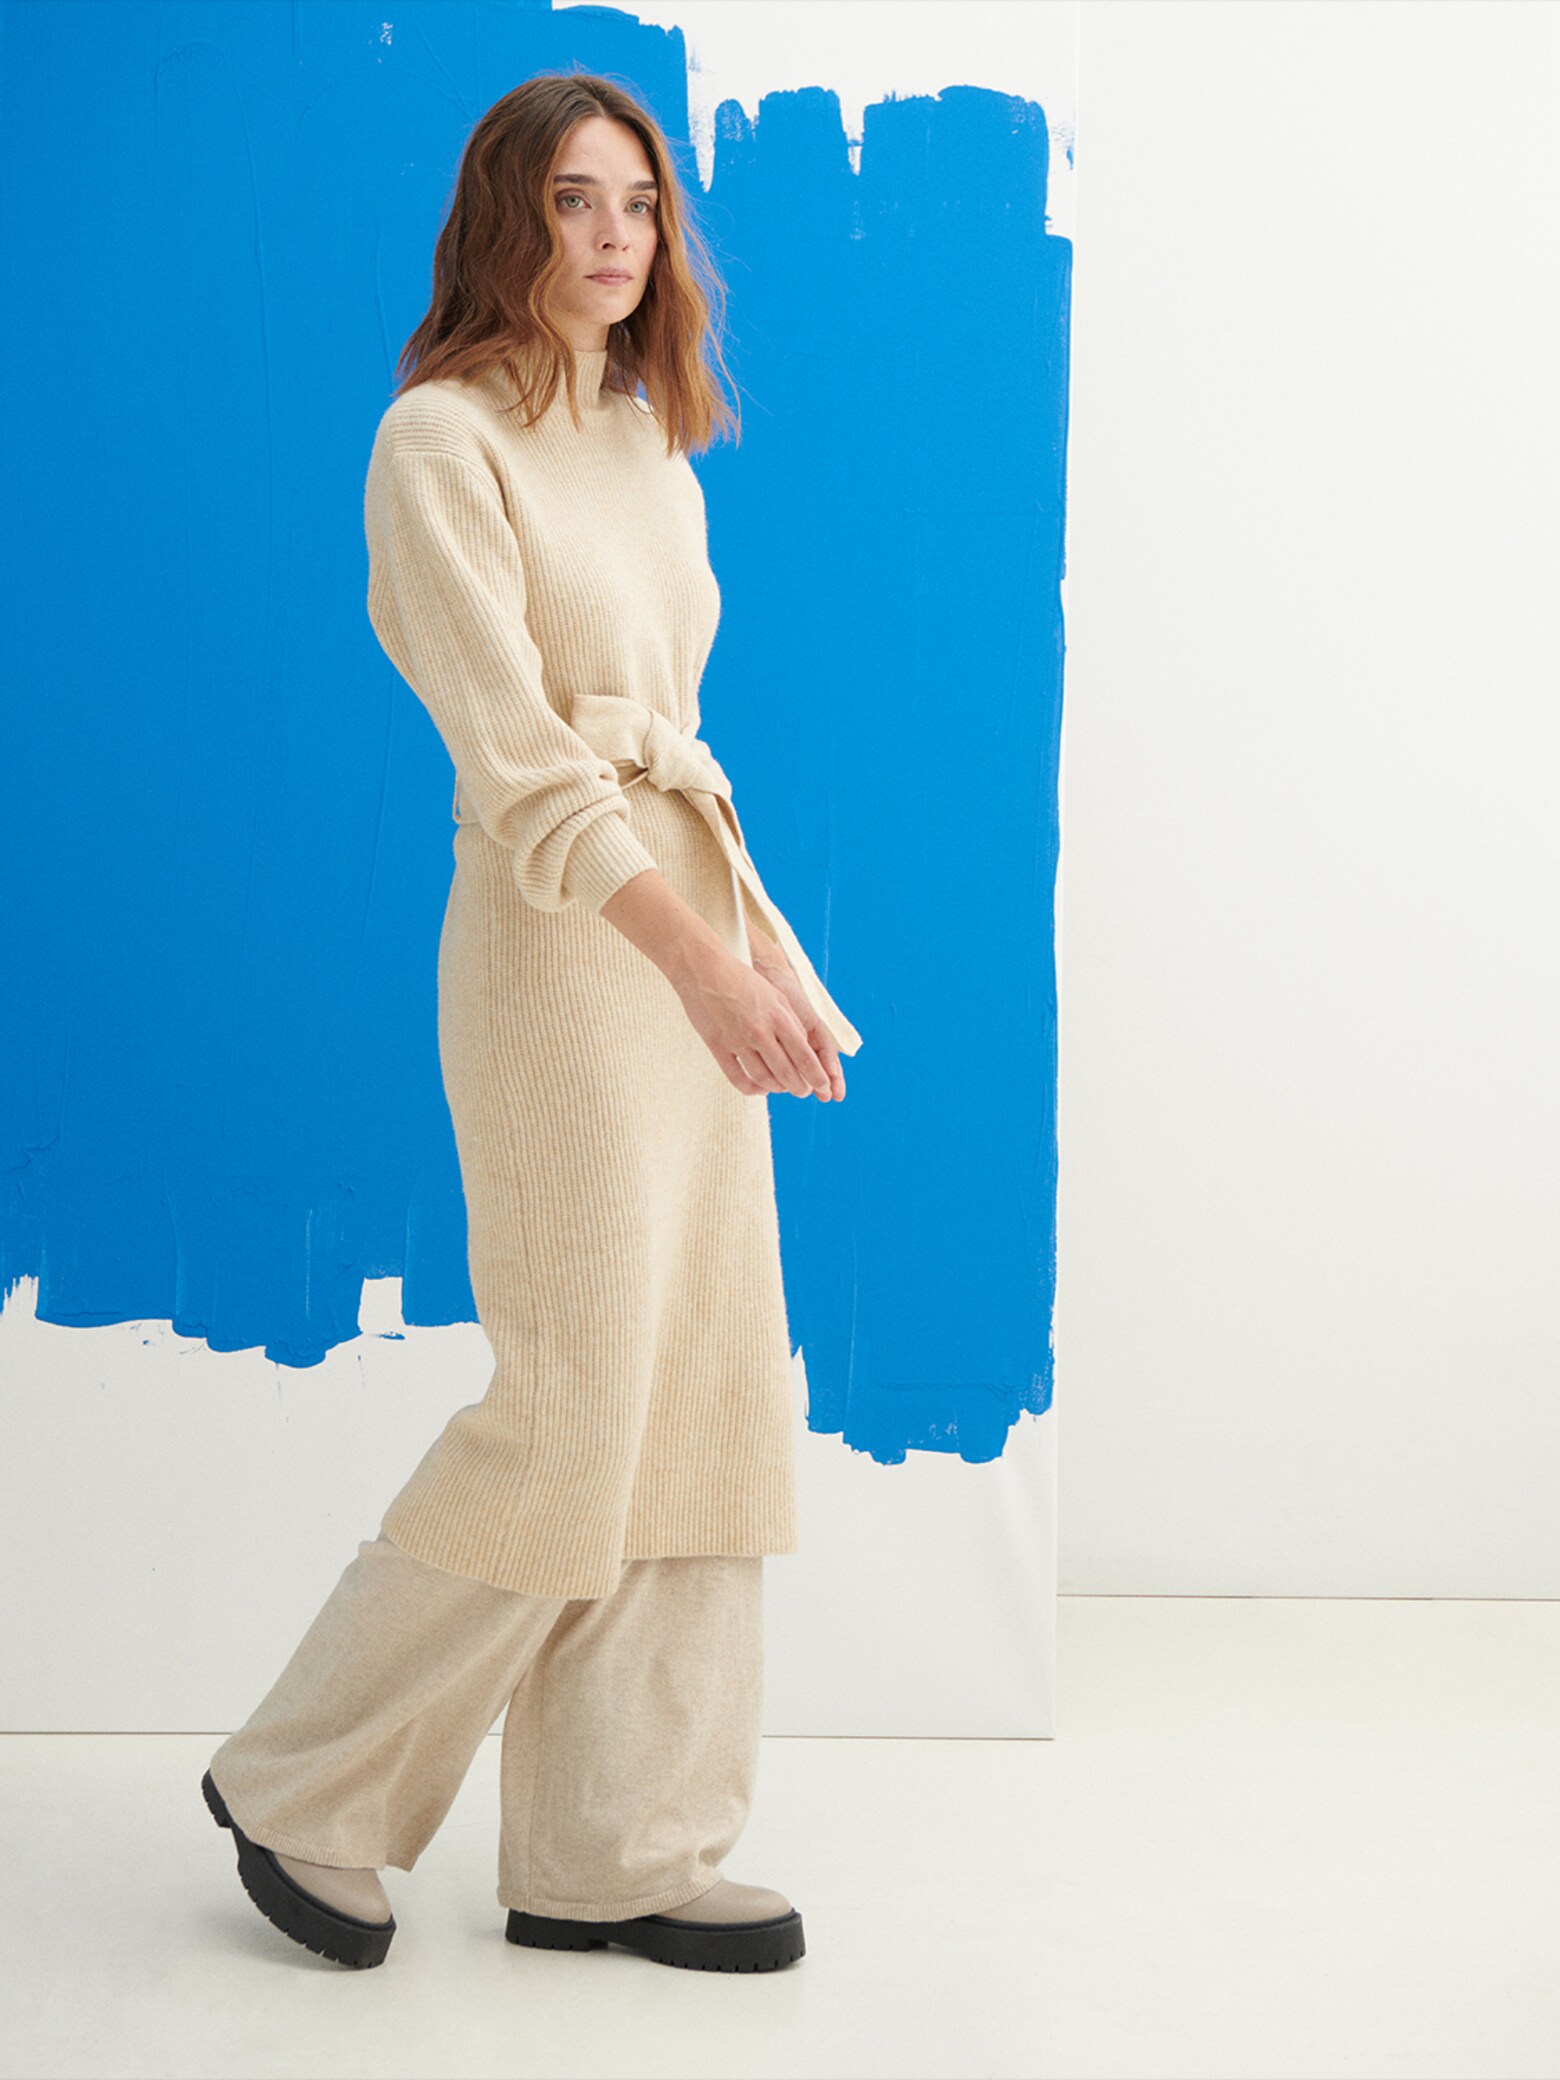 Structured to perfection The midi dress magic